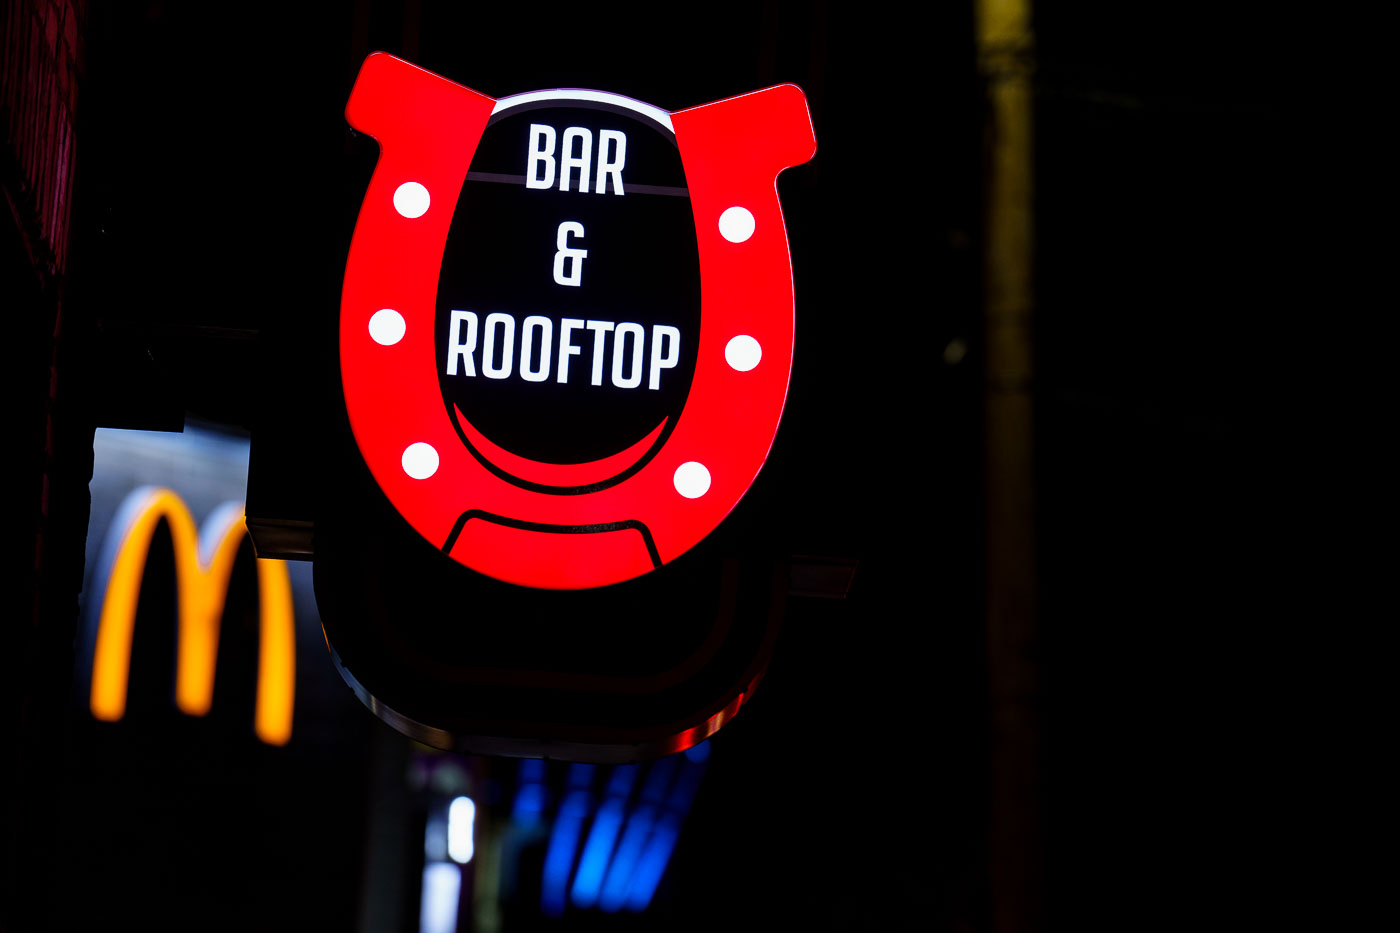 Horseshoe shaped sign reading Bar and Rooftop